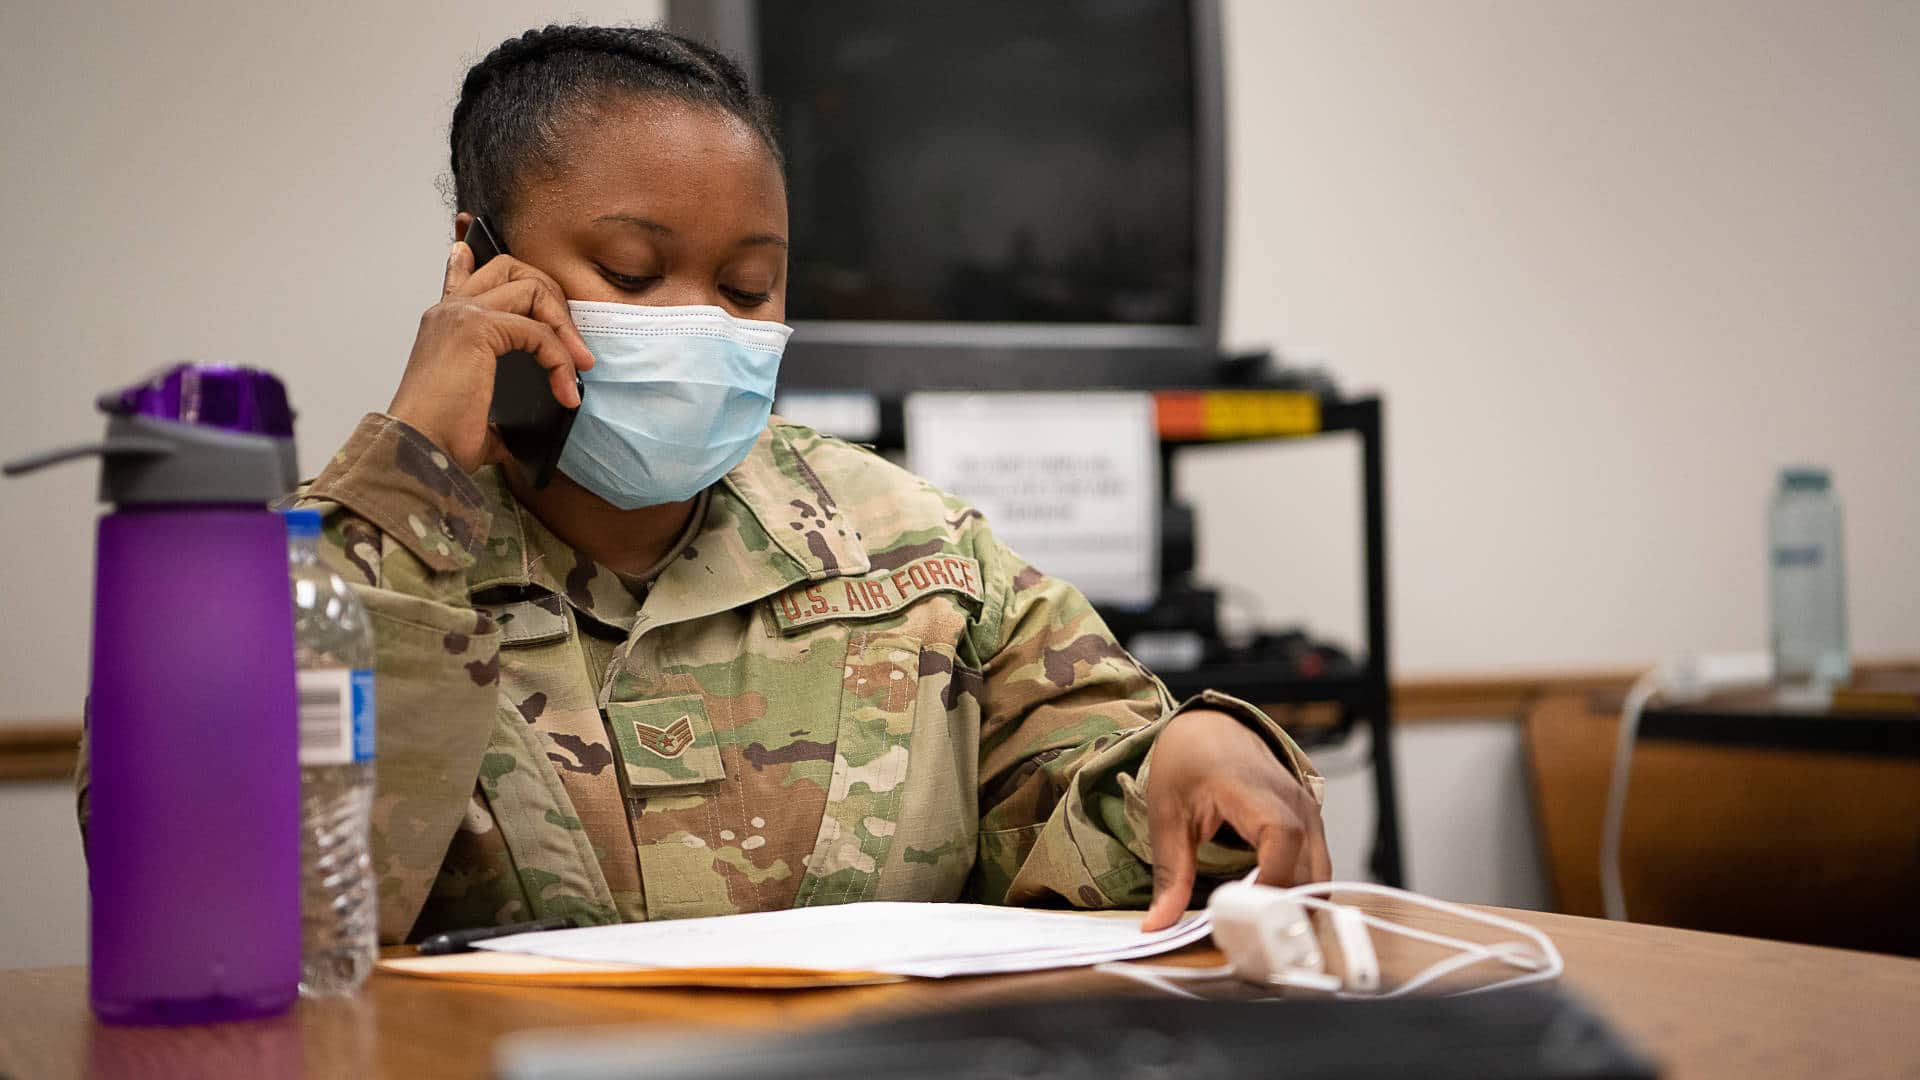 Staff Sergeant Shawntoria Miles, a medic with the Oklahoma Air National Guard, calls an individual as part of contact tracing operations in Guymon, Oklahoma in May 2020.